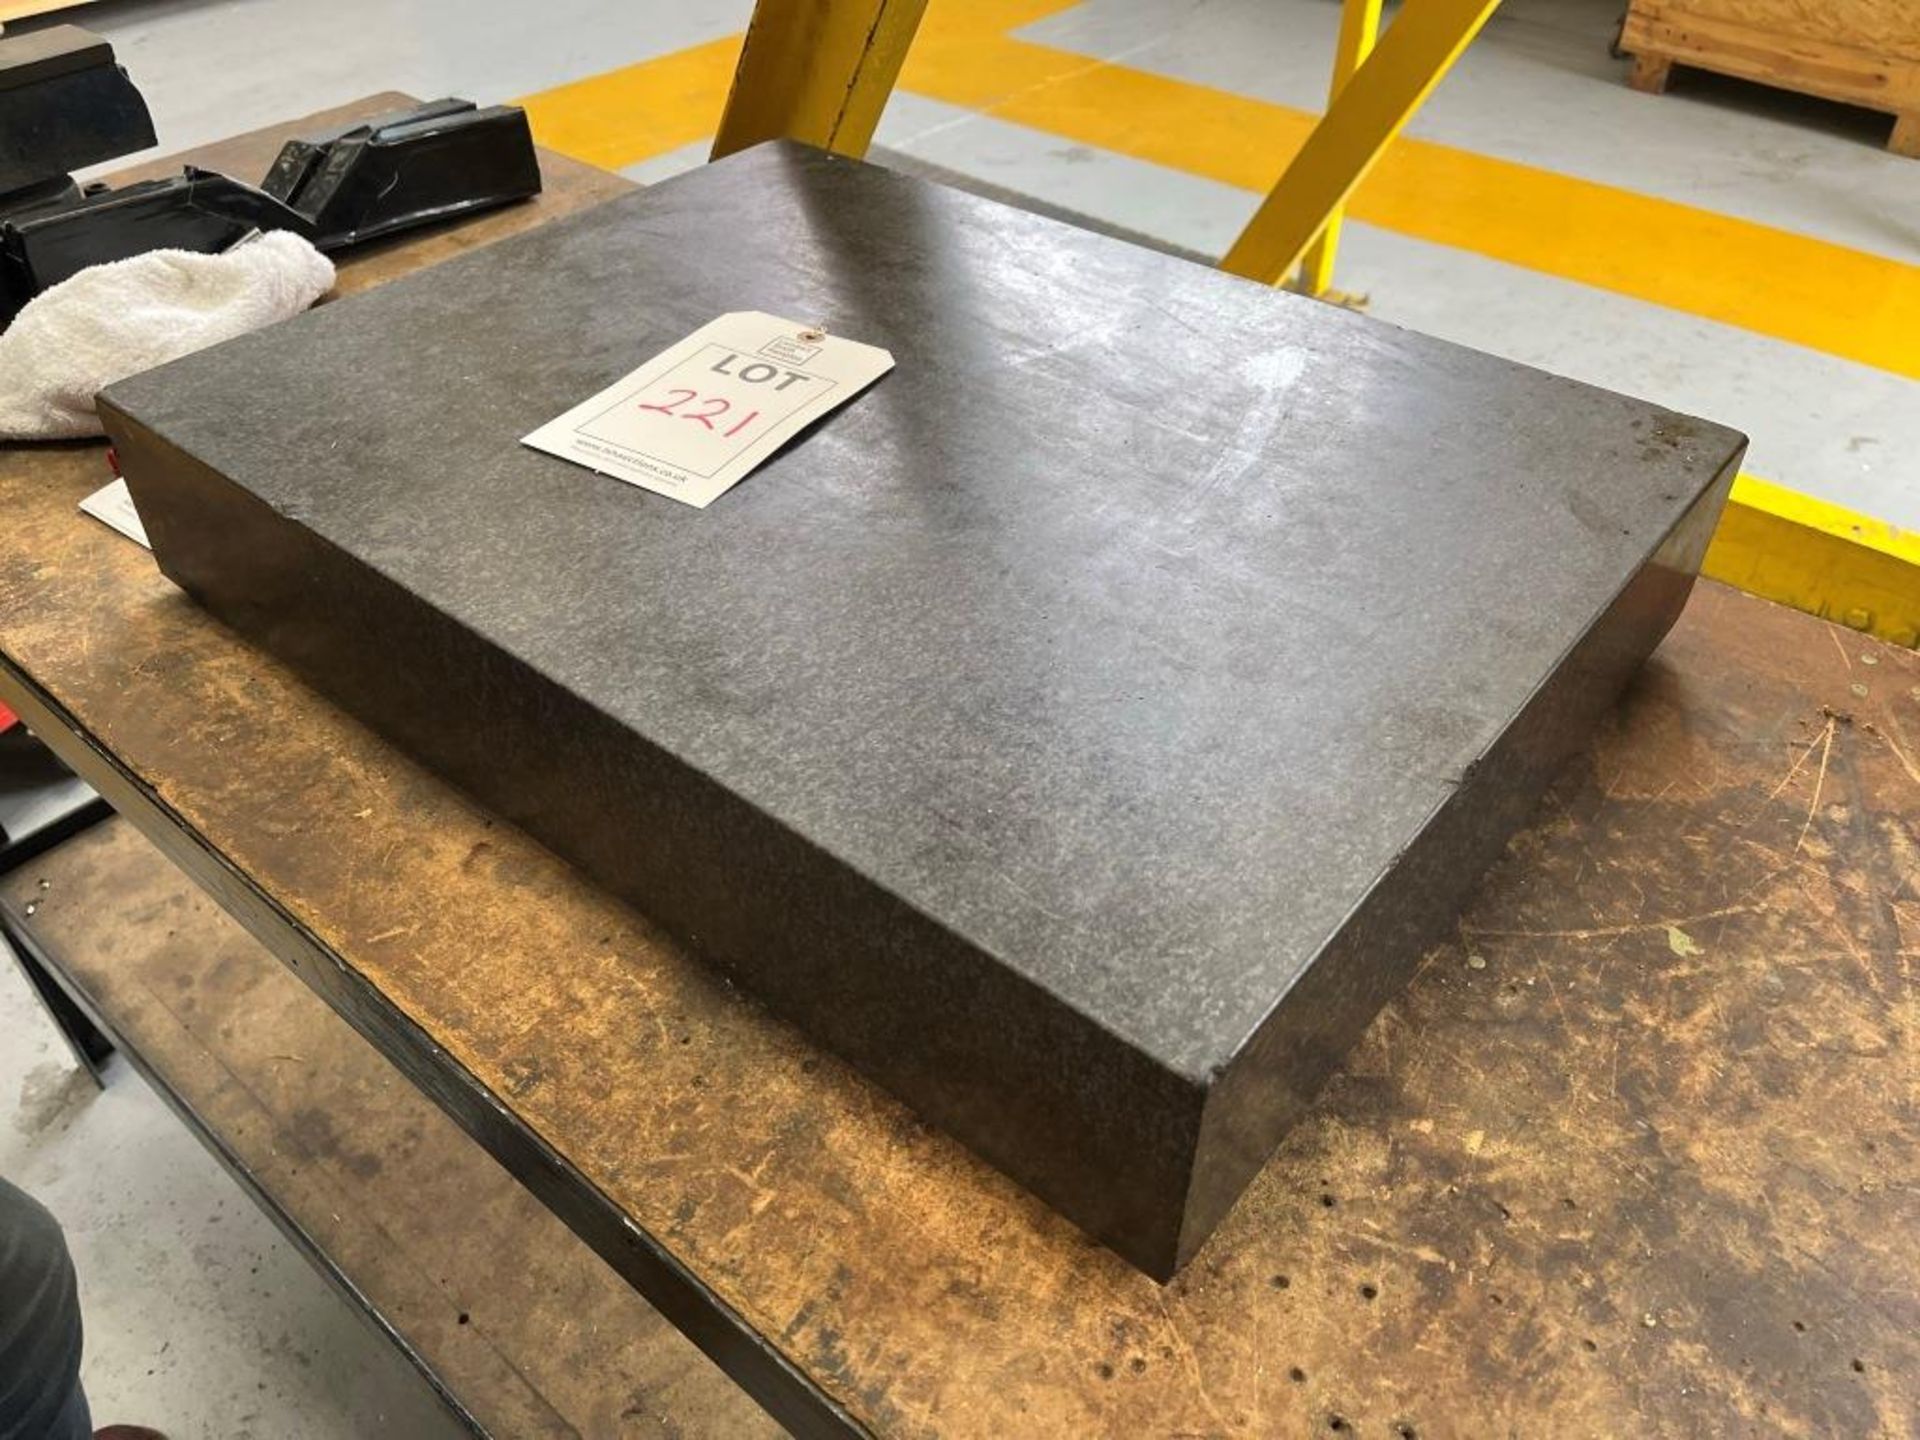 Crown 18" x 24" inspection surface plate